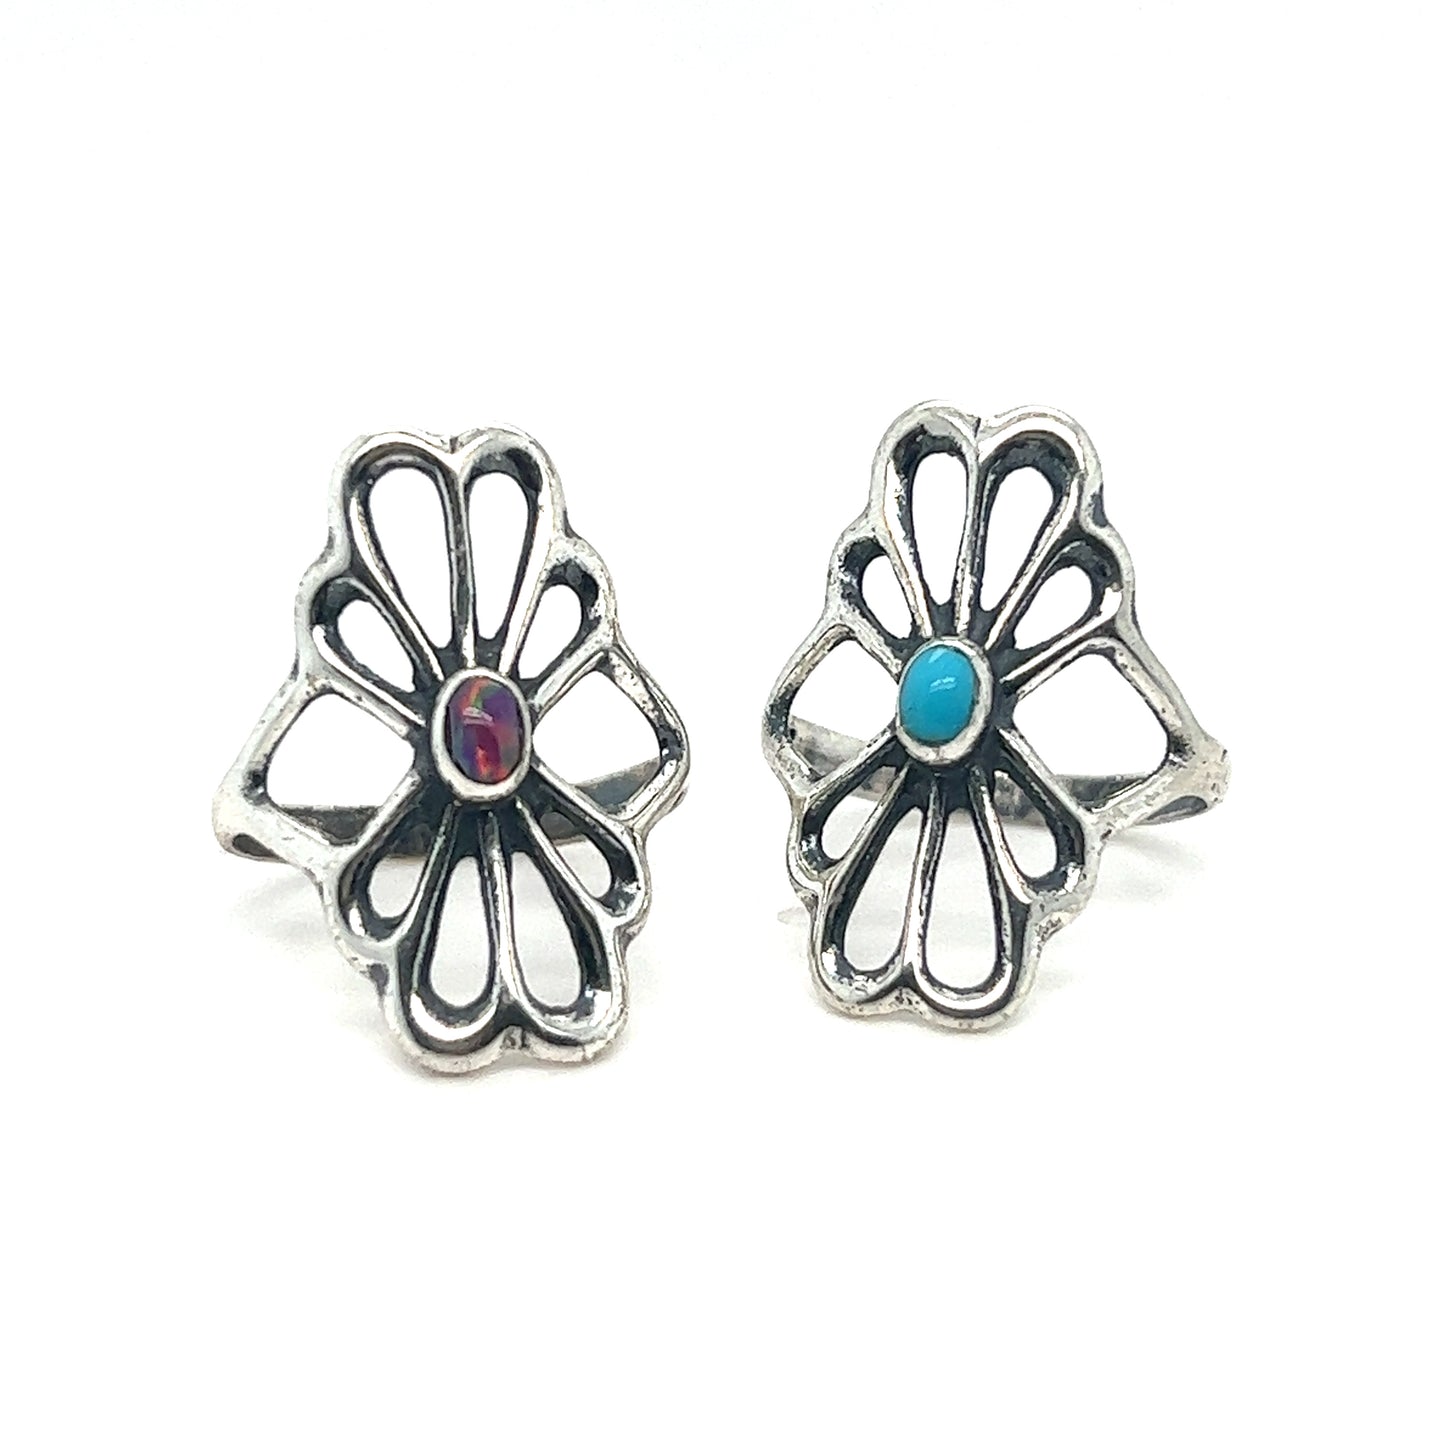 A pair of handcrafted Super Silver American Made Flower Rings with oval turquoise stones.